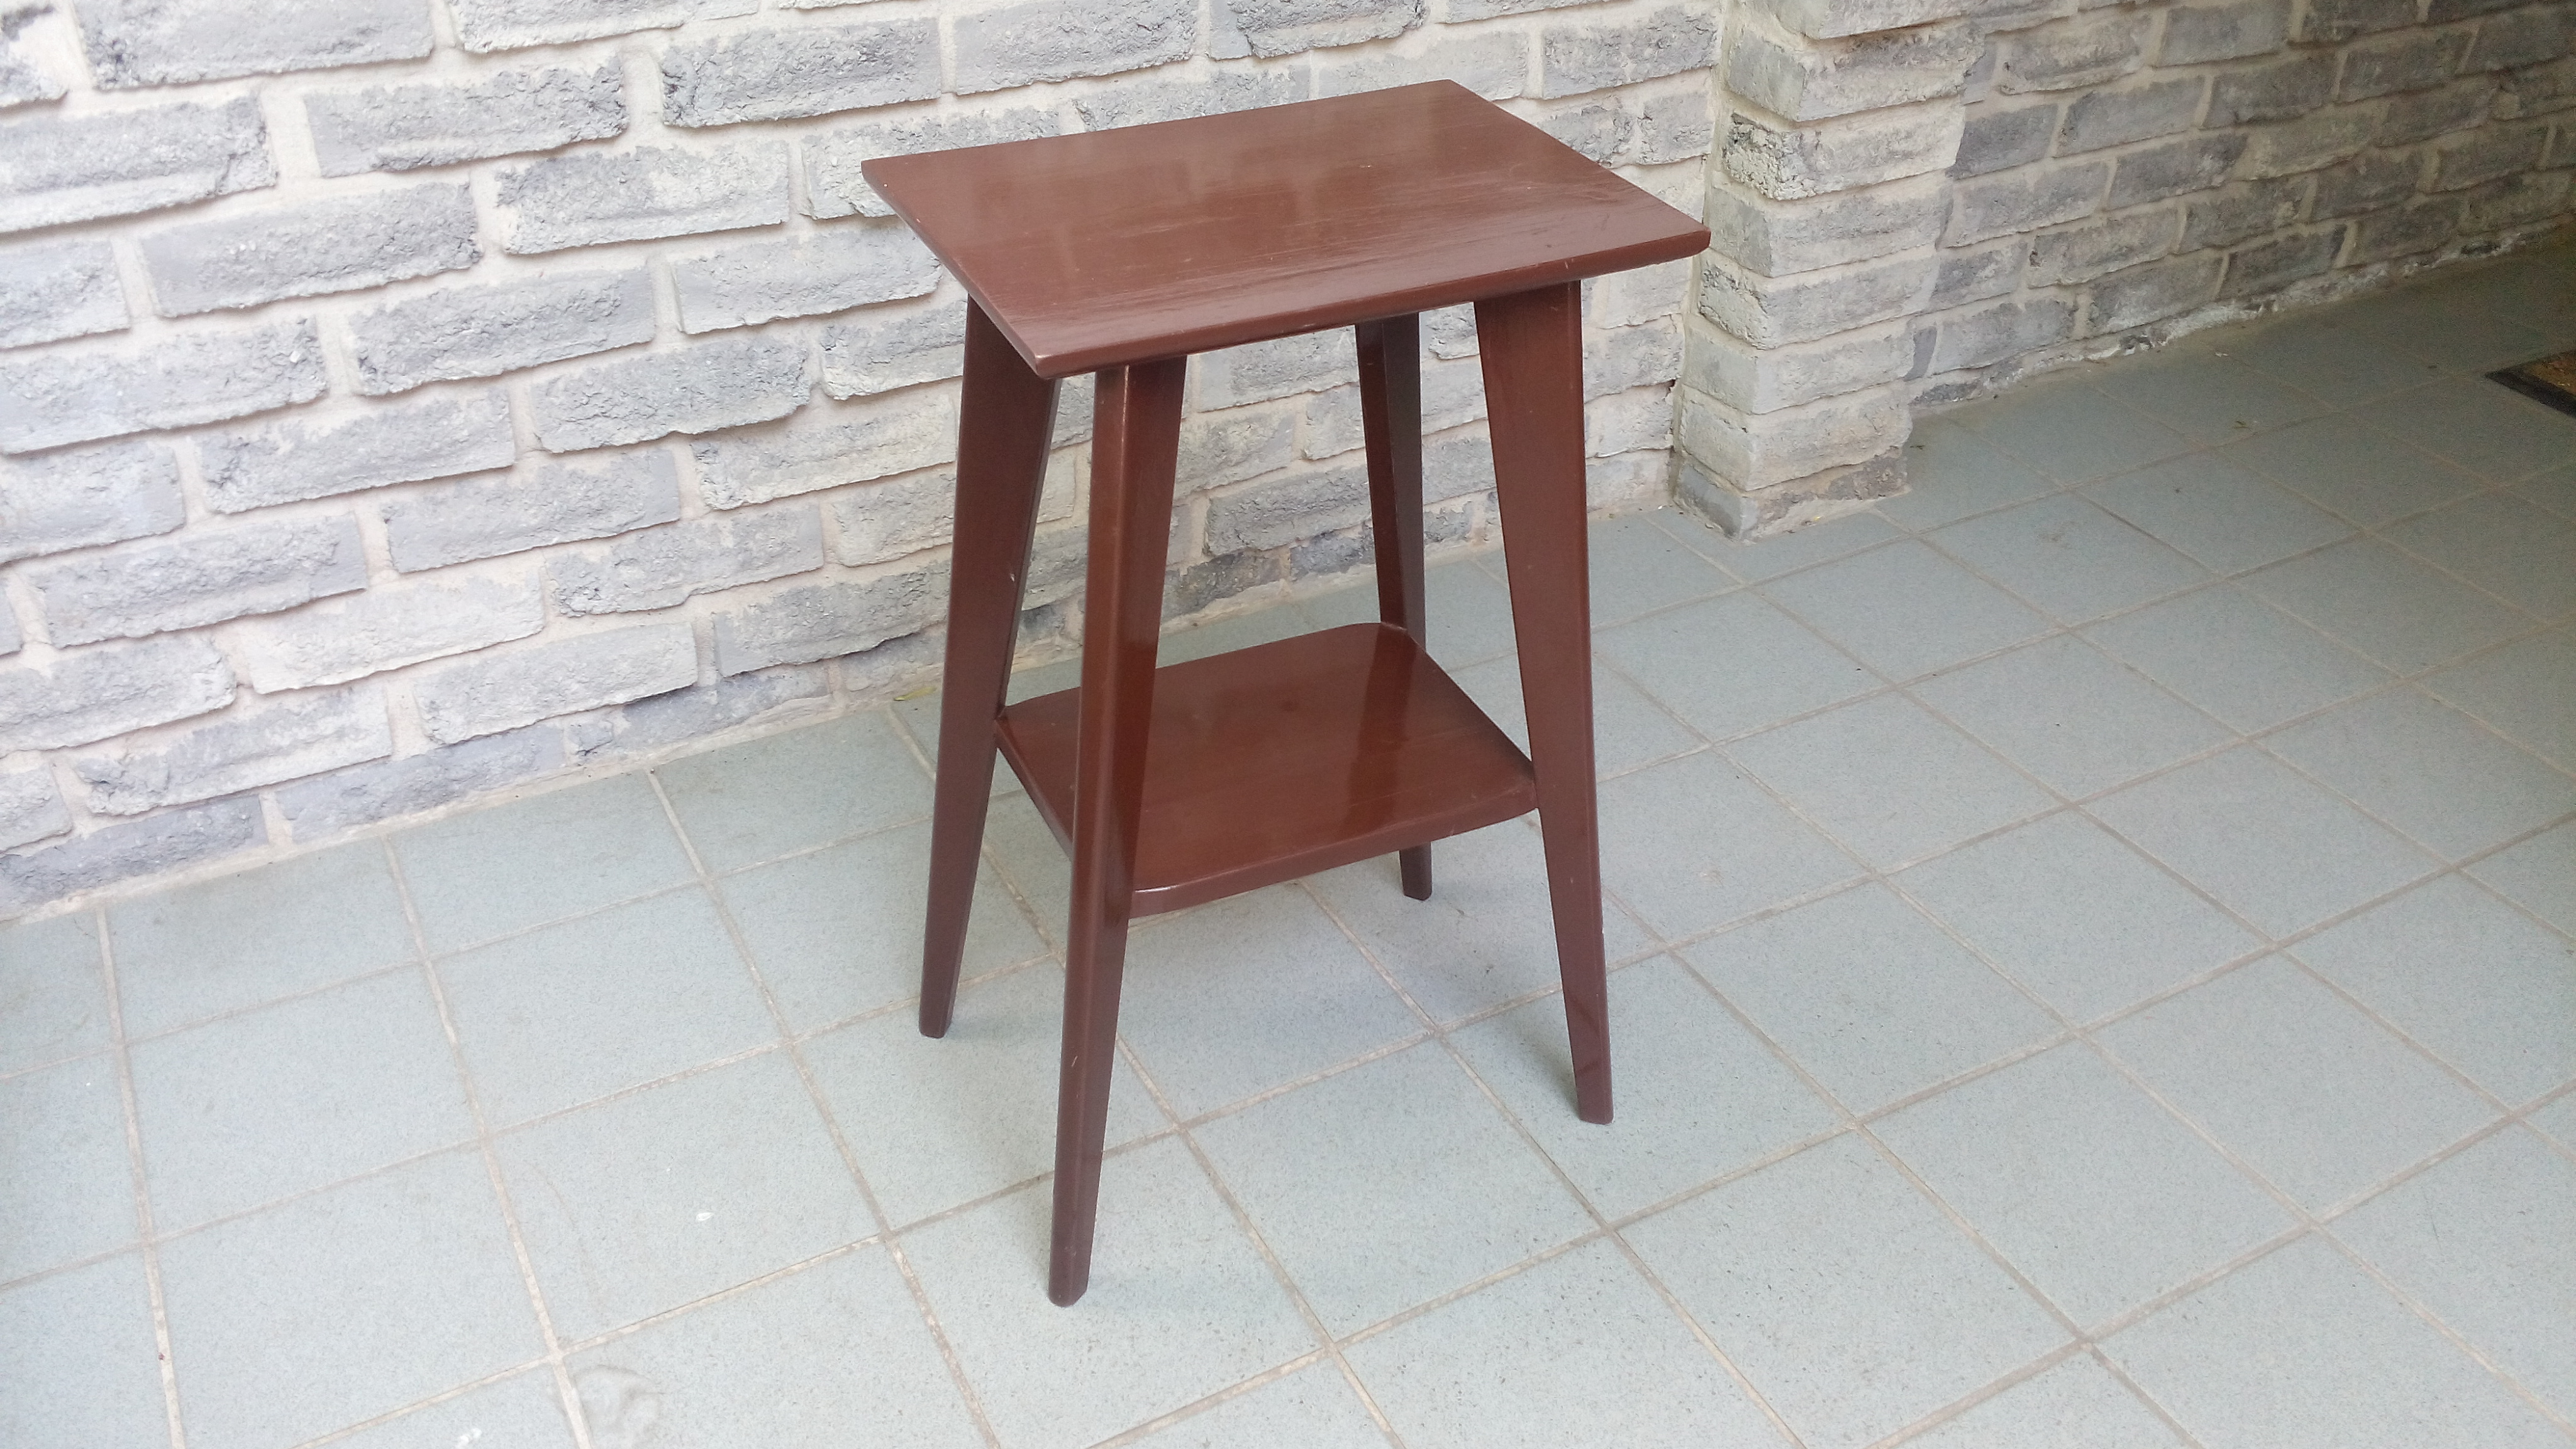 solid wood accent table img tables tures console with storage bunnings outdoor lounge chair iron frame queen small round gold end gallerie locations furniture side driftwood